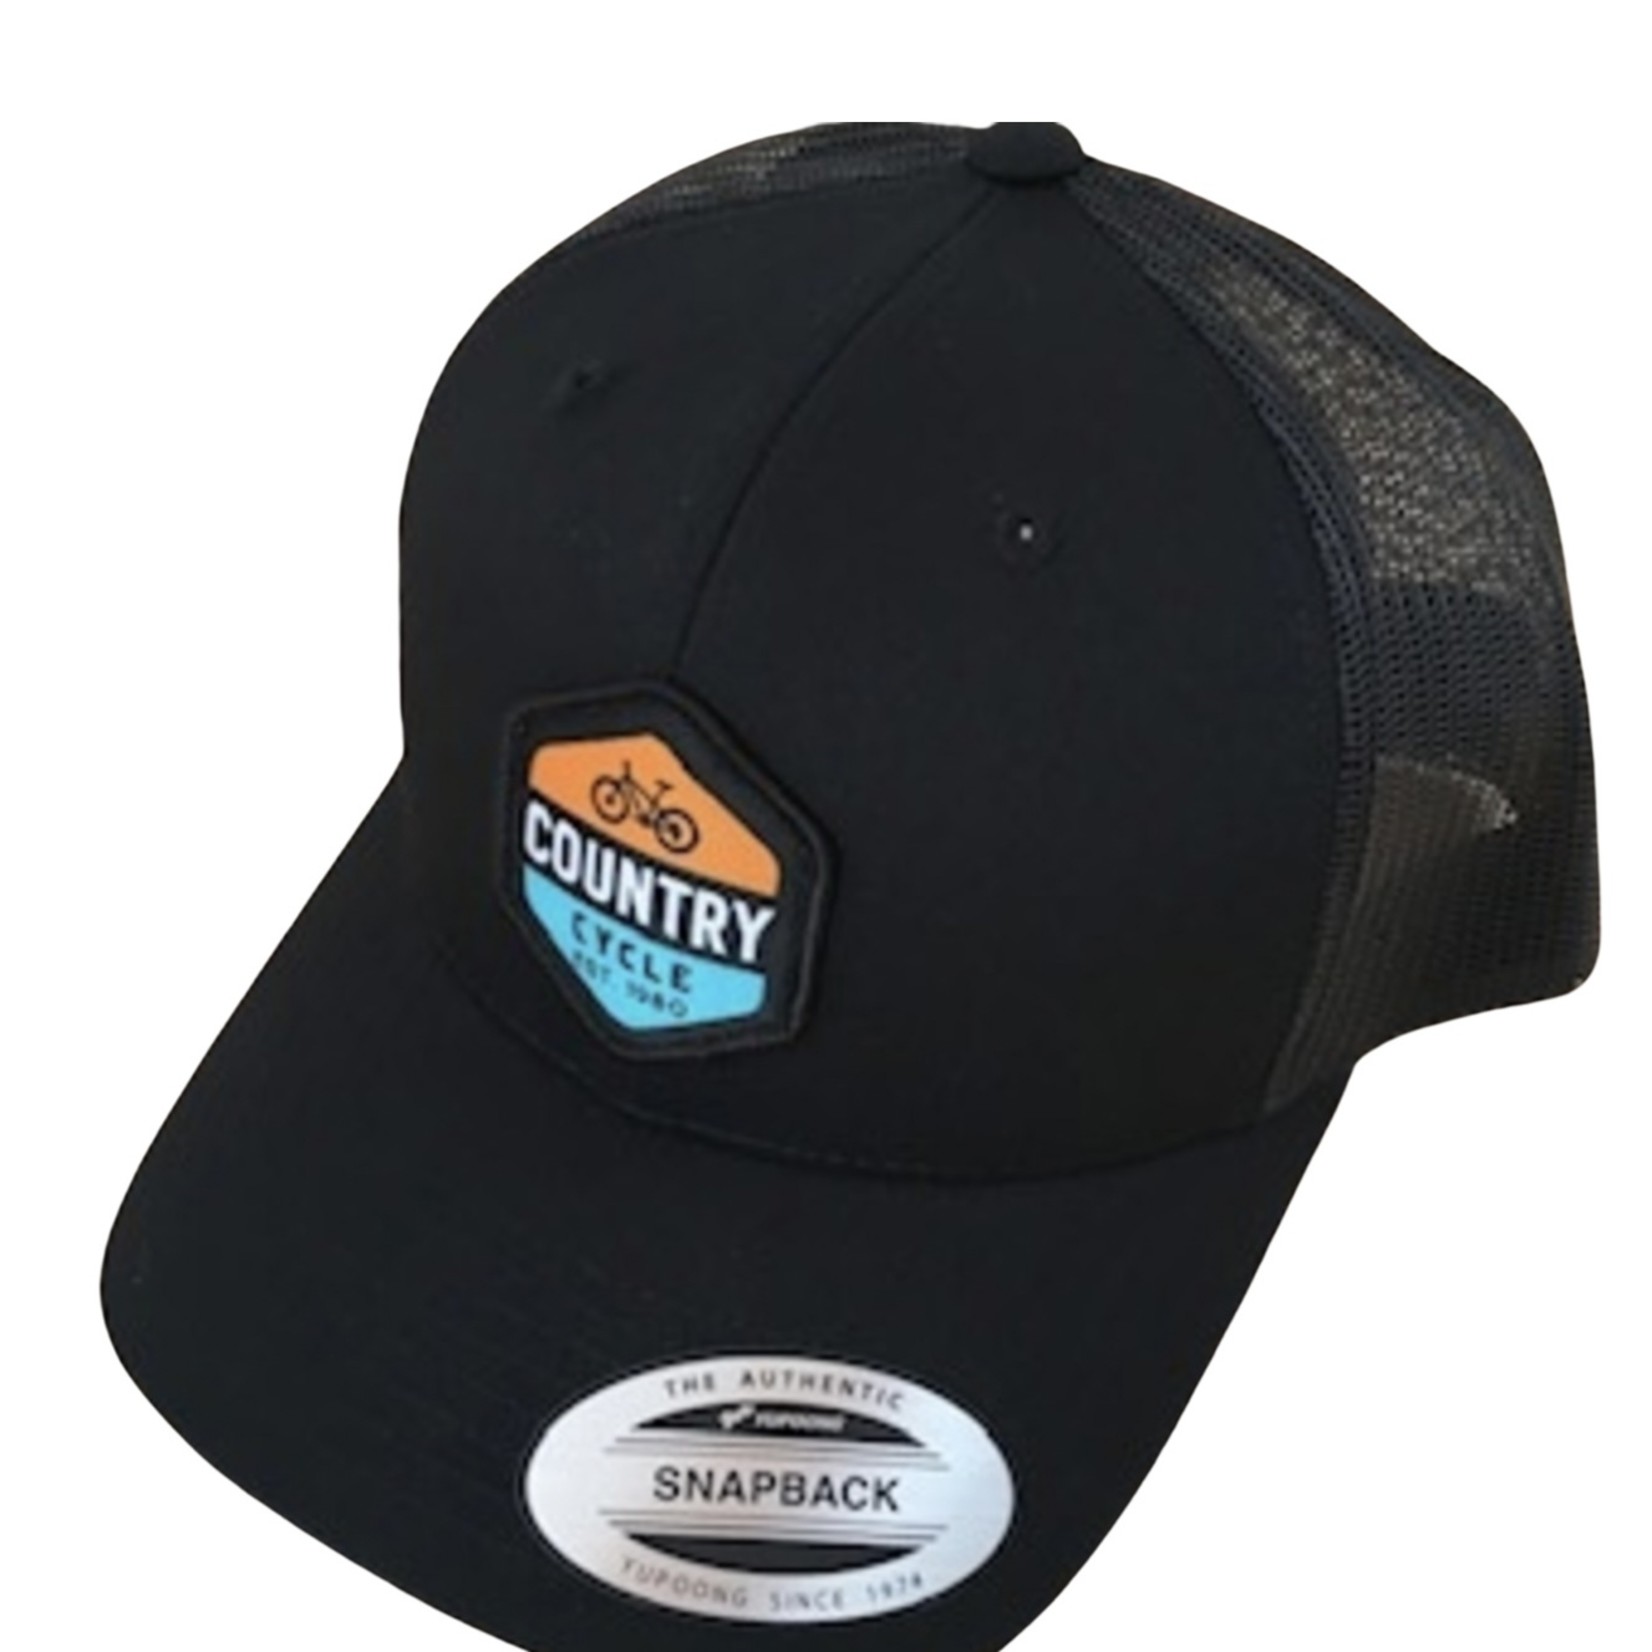 Yupoong Country Cycle Cap